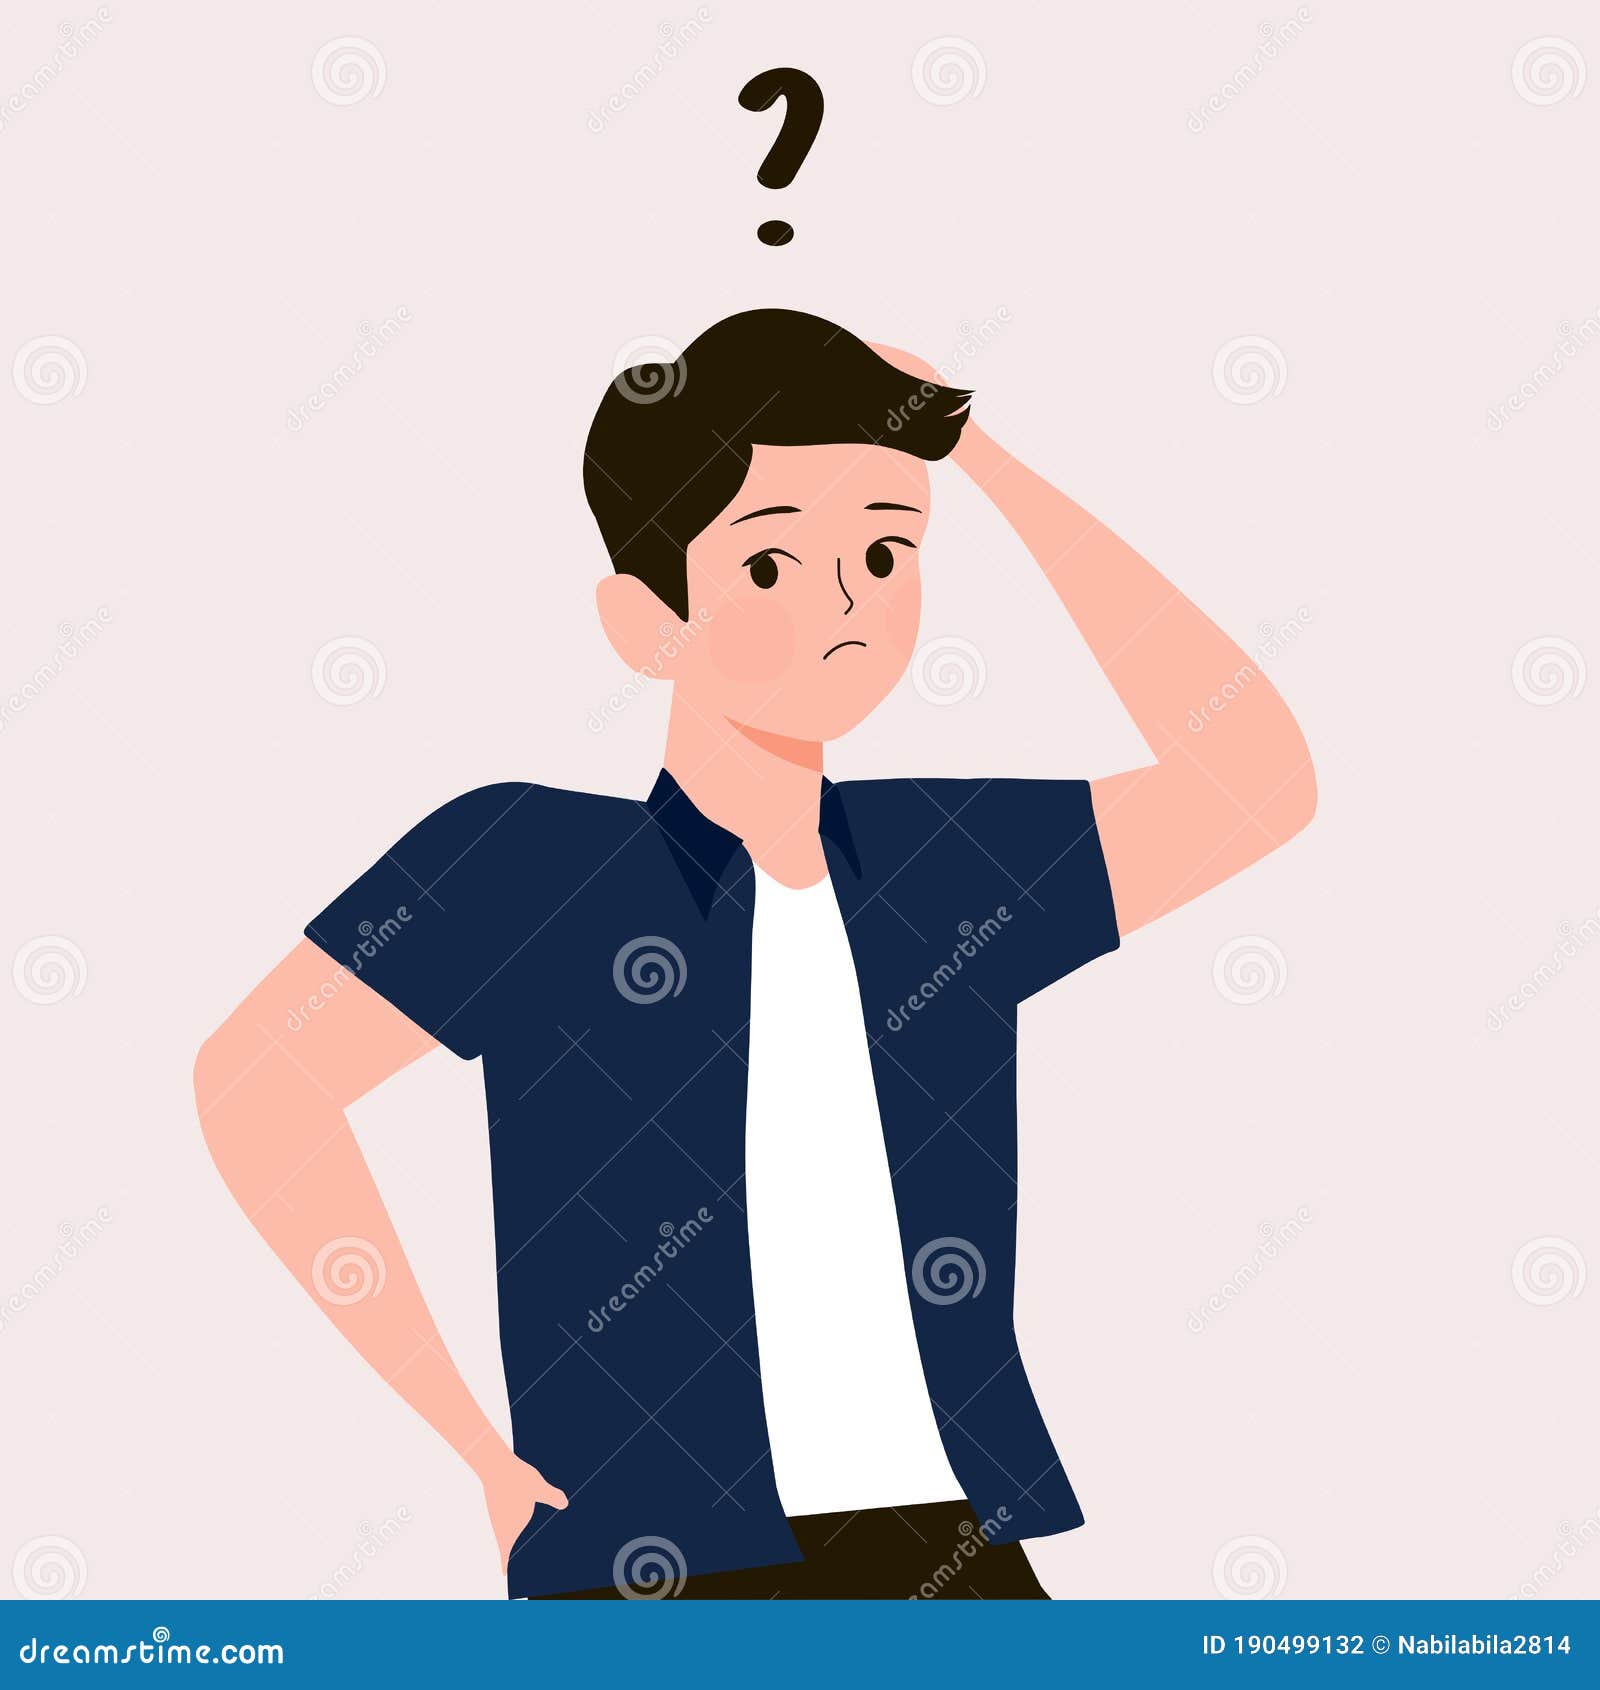 Cartoon Thinking Man With Question Mark Vector Illustration Male Is Confusing Portrait Of